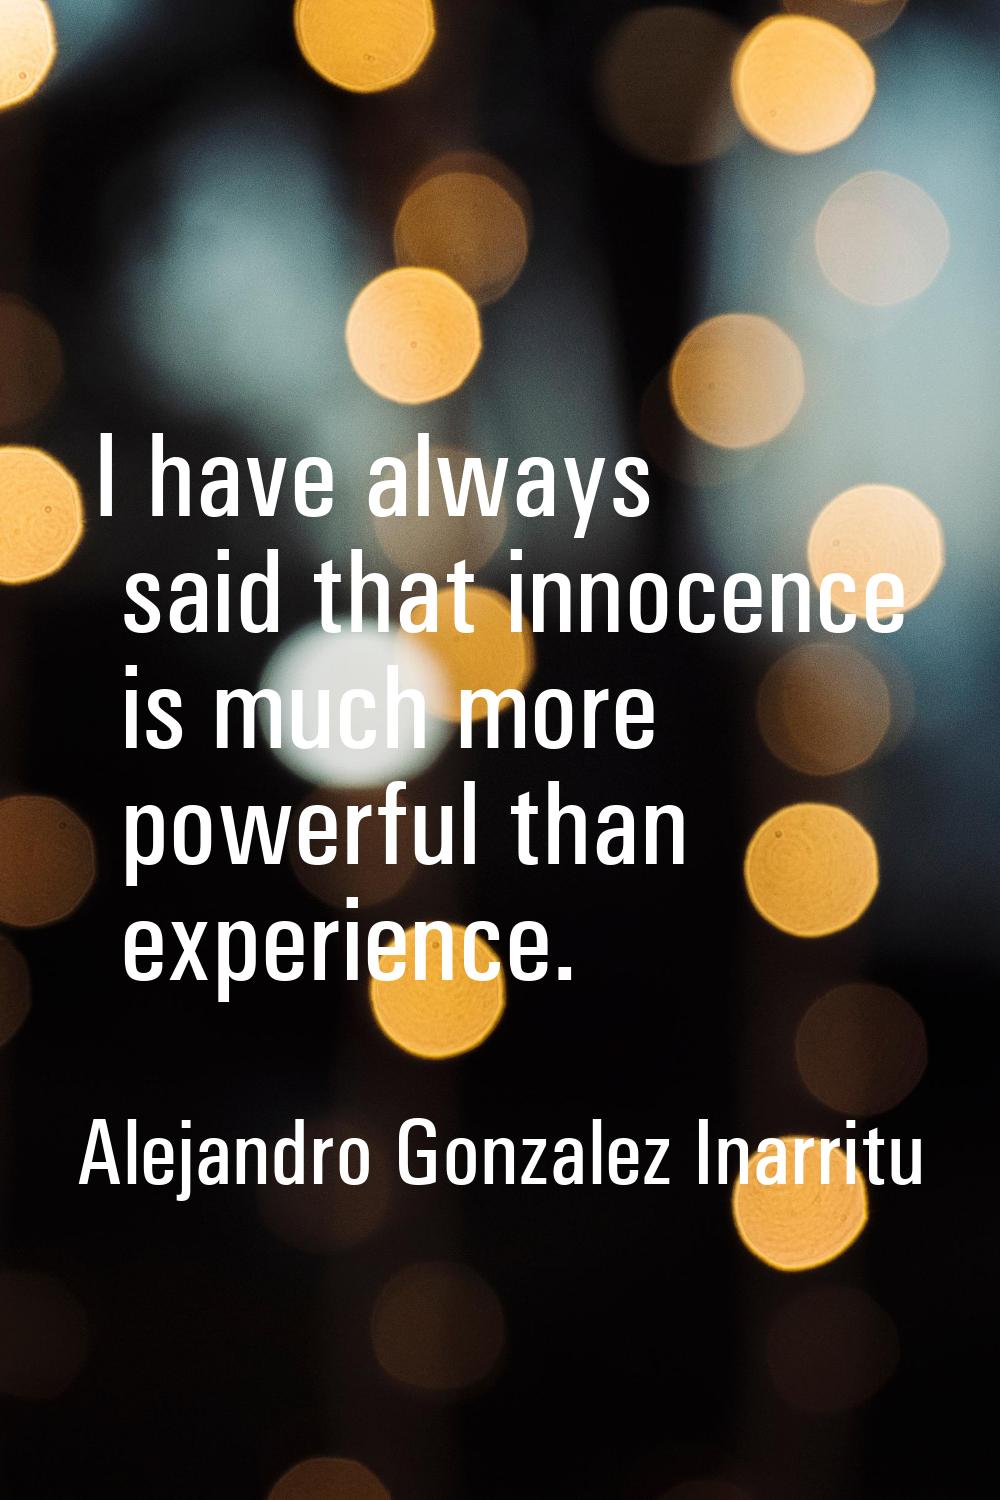 I have always said that innocence is much more powerful than experience.